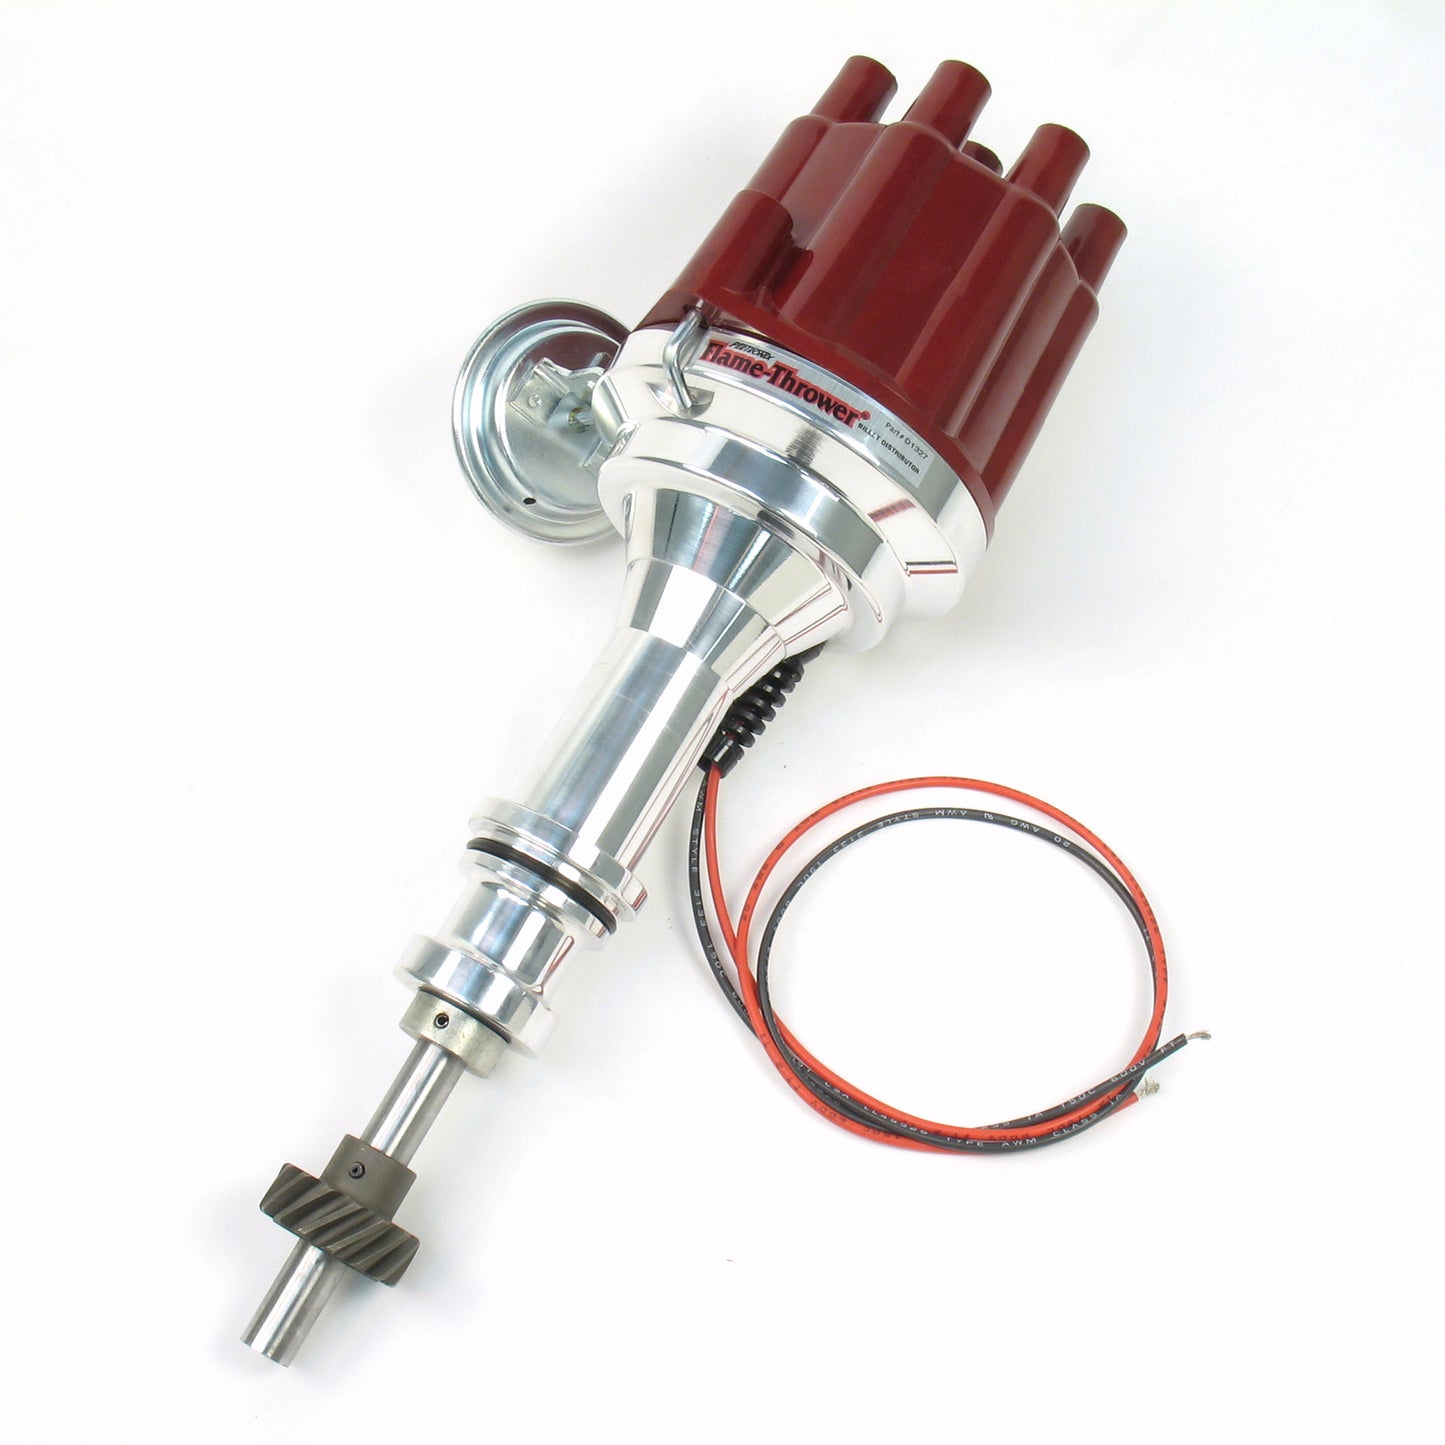 PerTronix D7132701 Flame-Thrower Electronic Distributor Billet Ford 351C with Ignitor III Vacuum Advance Red Cap